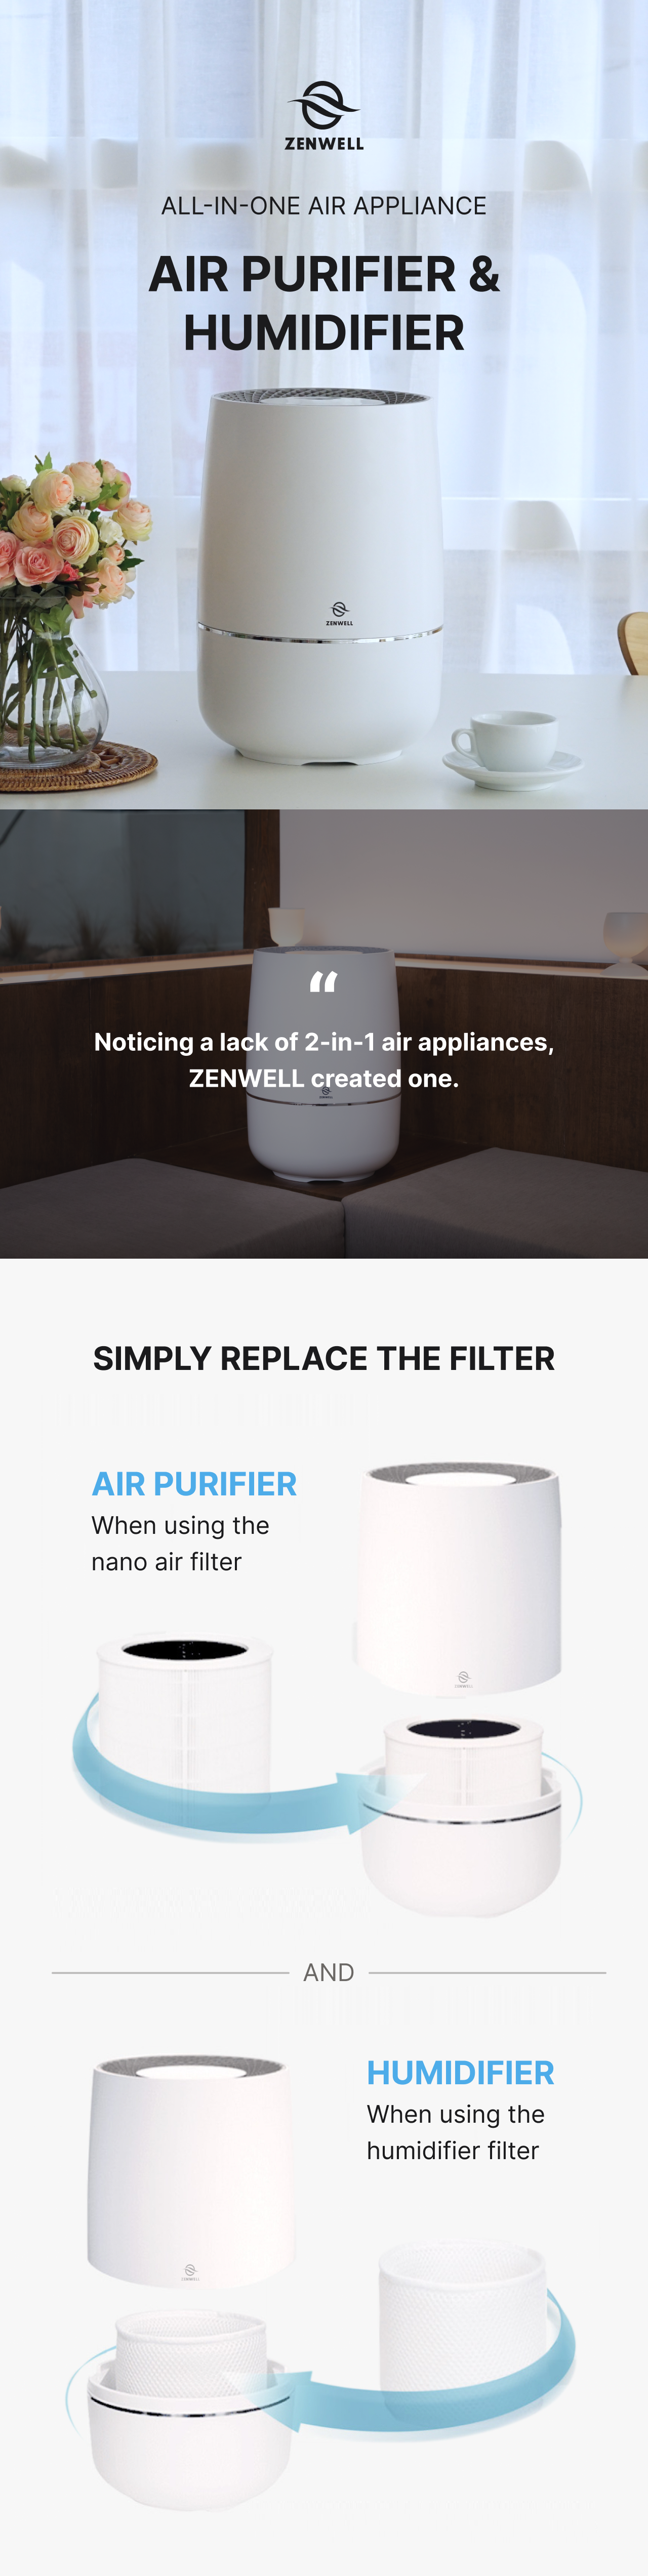 Air Purifier and Humidifier product description image describing Zenwell's device as one of the only 2-in-1 solutions on the market. Simply change between the humidification filter and the nano air filter to switch between humidification and purification functionality.